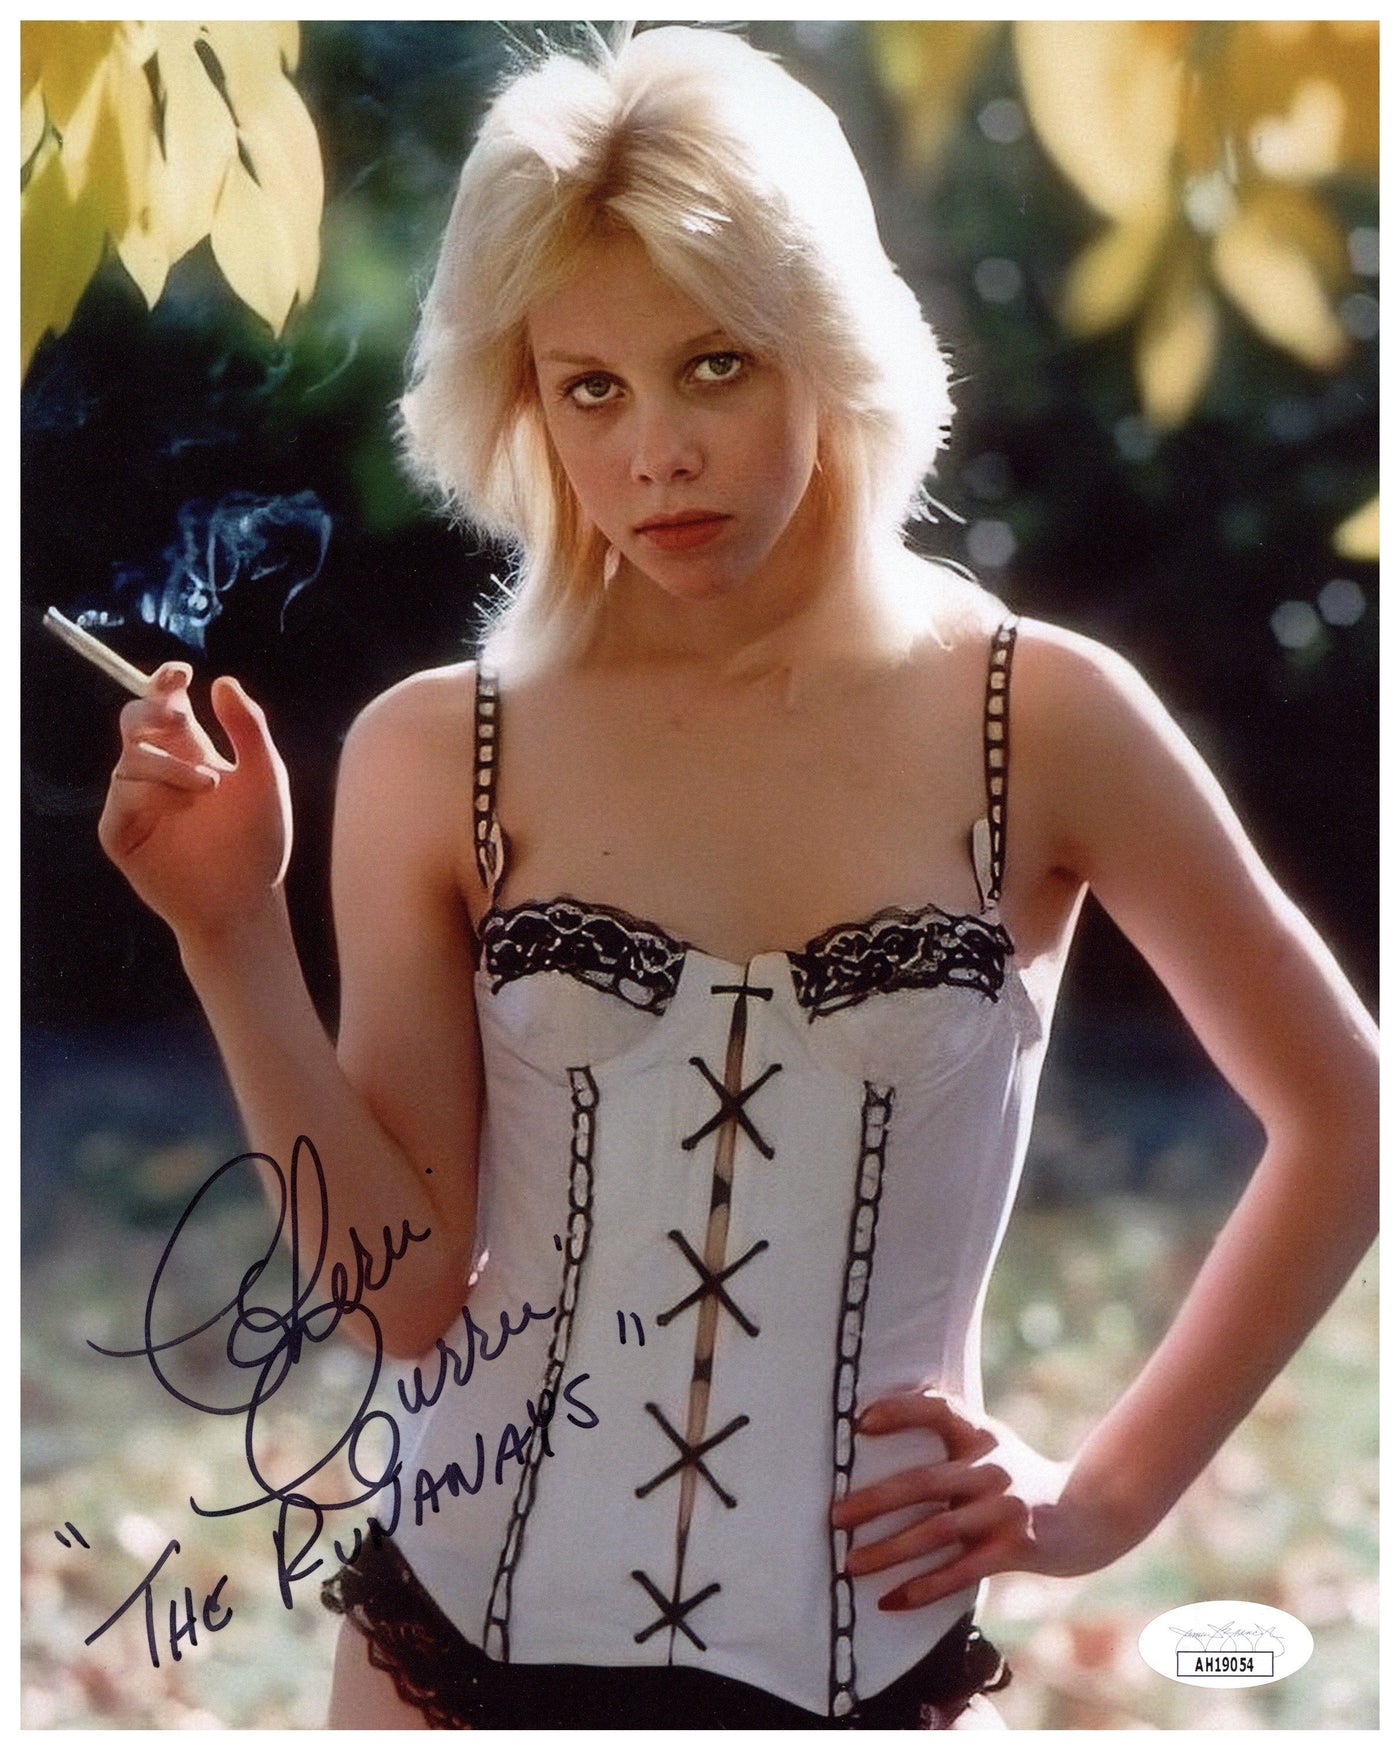 Cherie Currie Signed 8x10 Photo Cherry Bomb The Runaways Autographed JSA COA 3